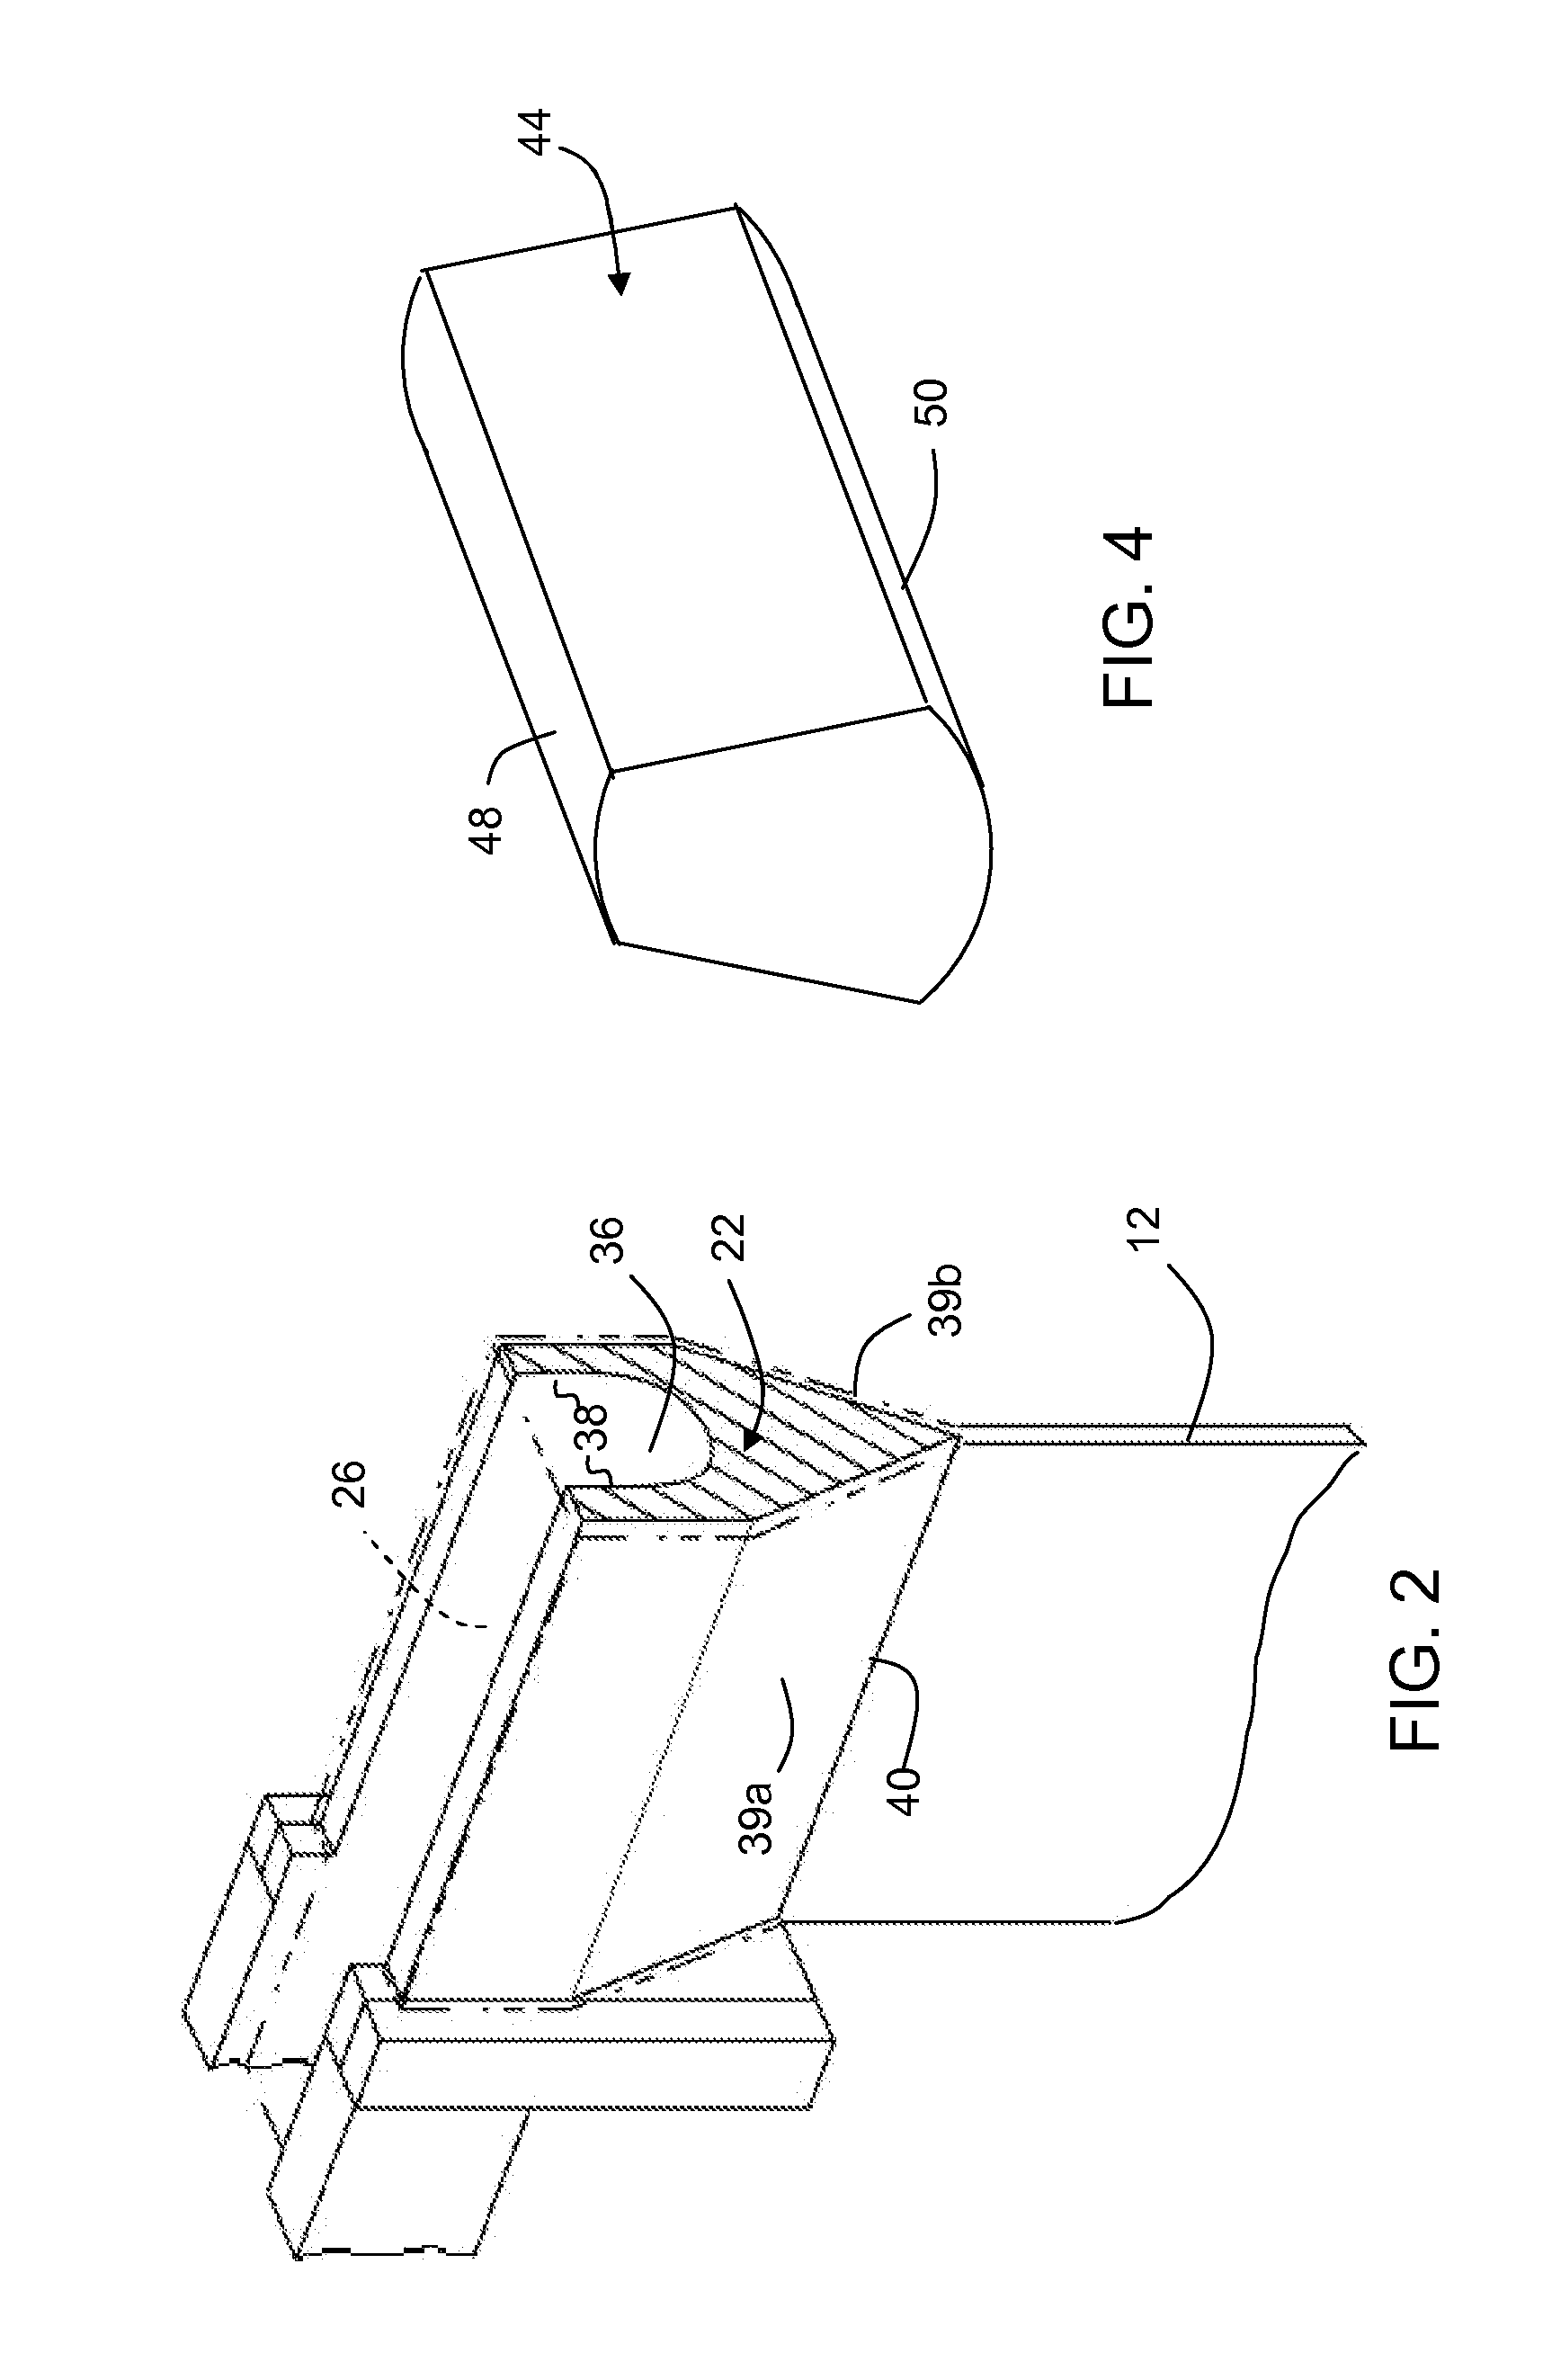 Large refractory article and method for making